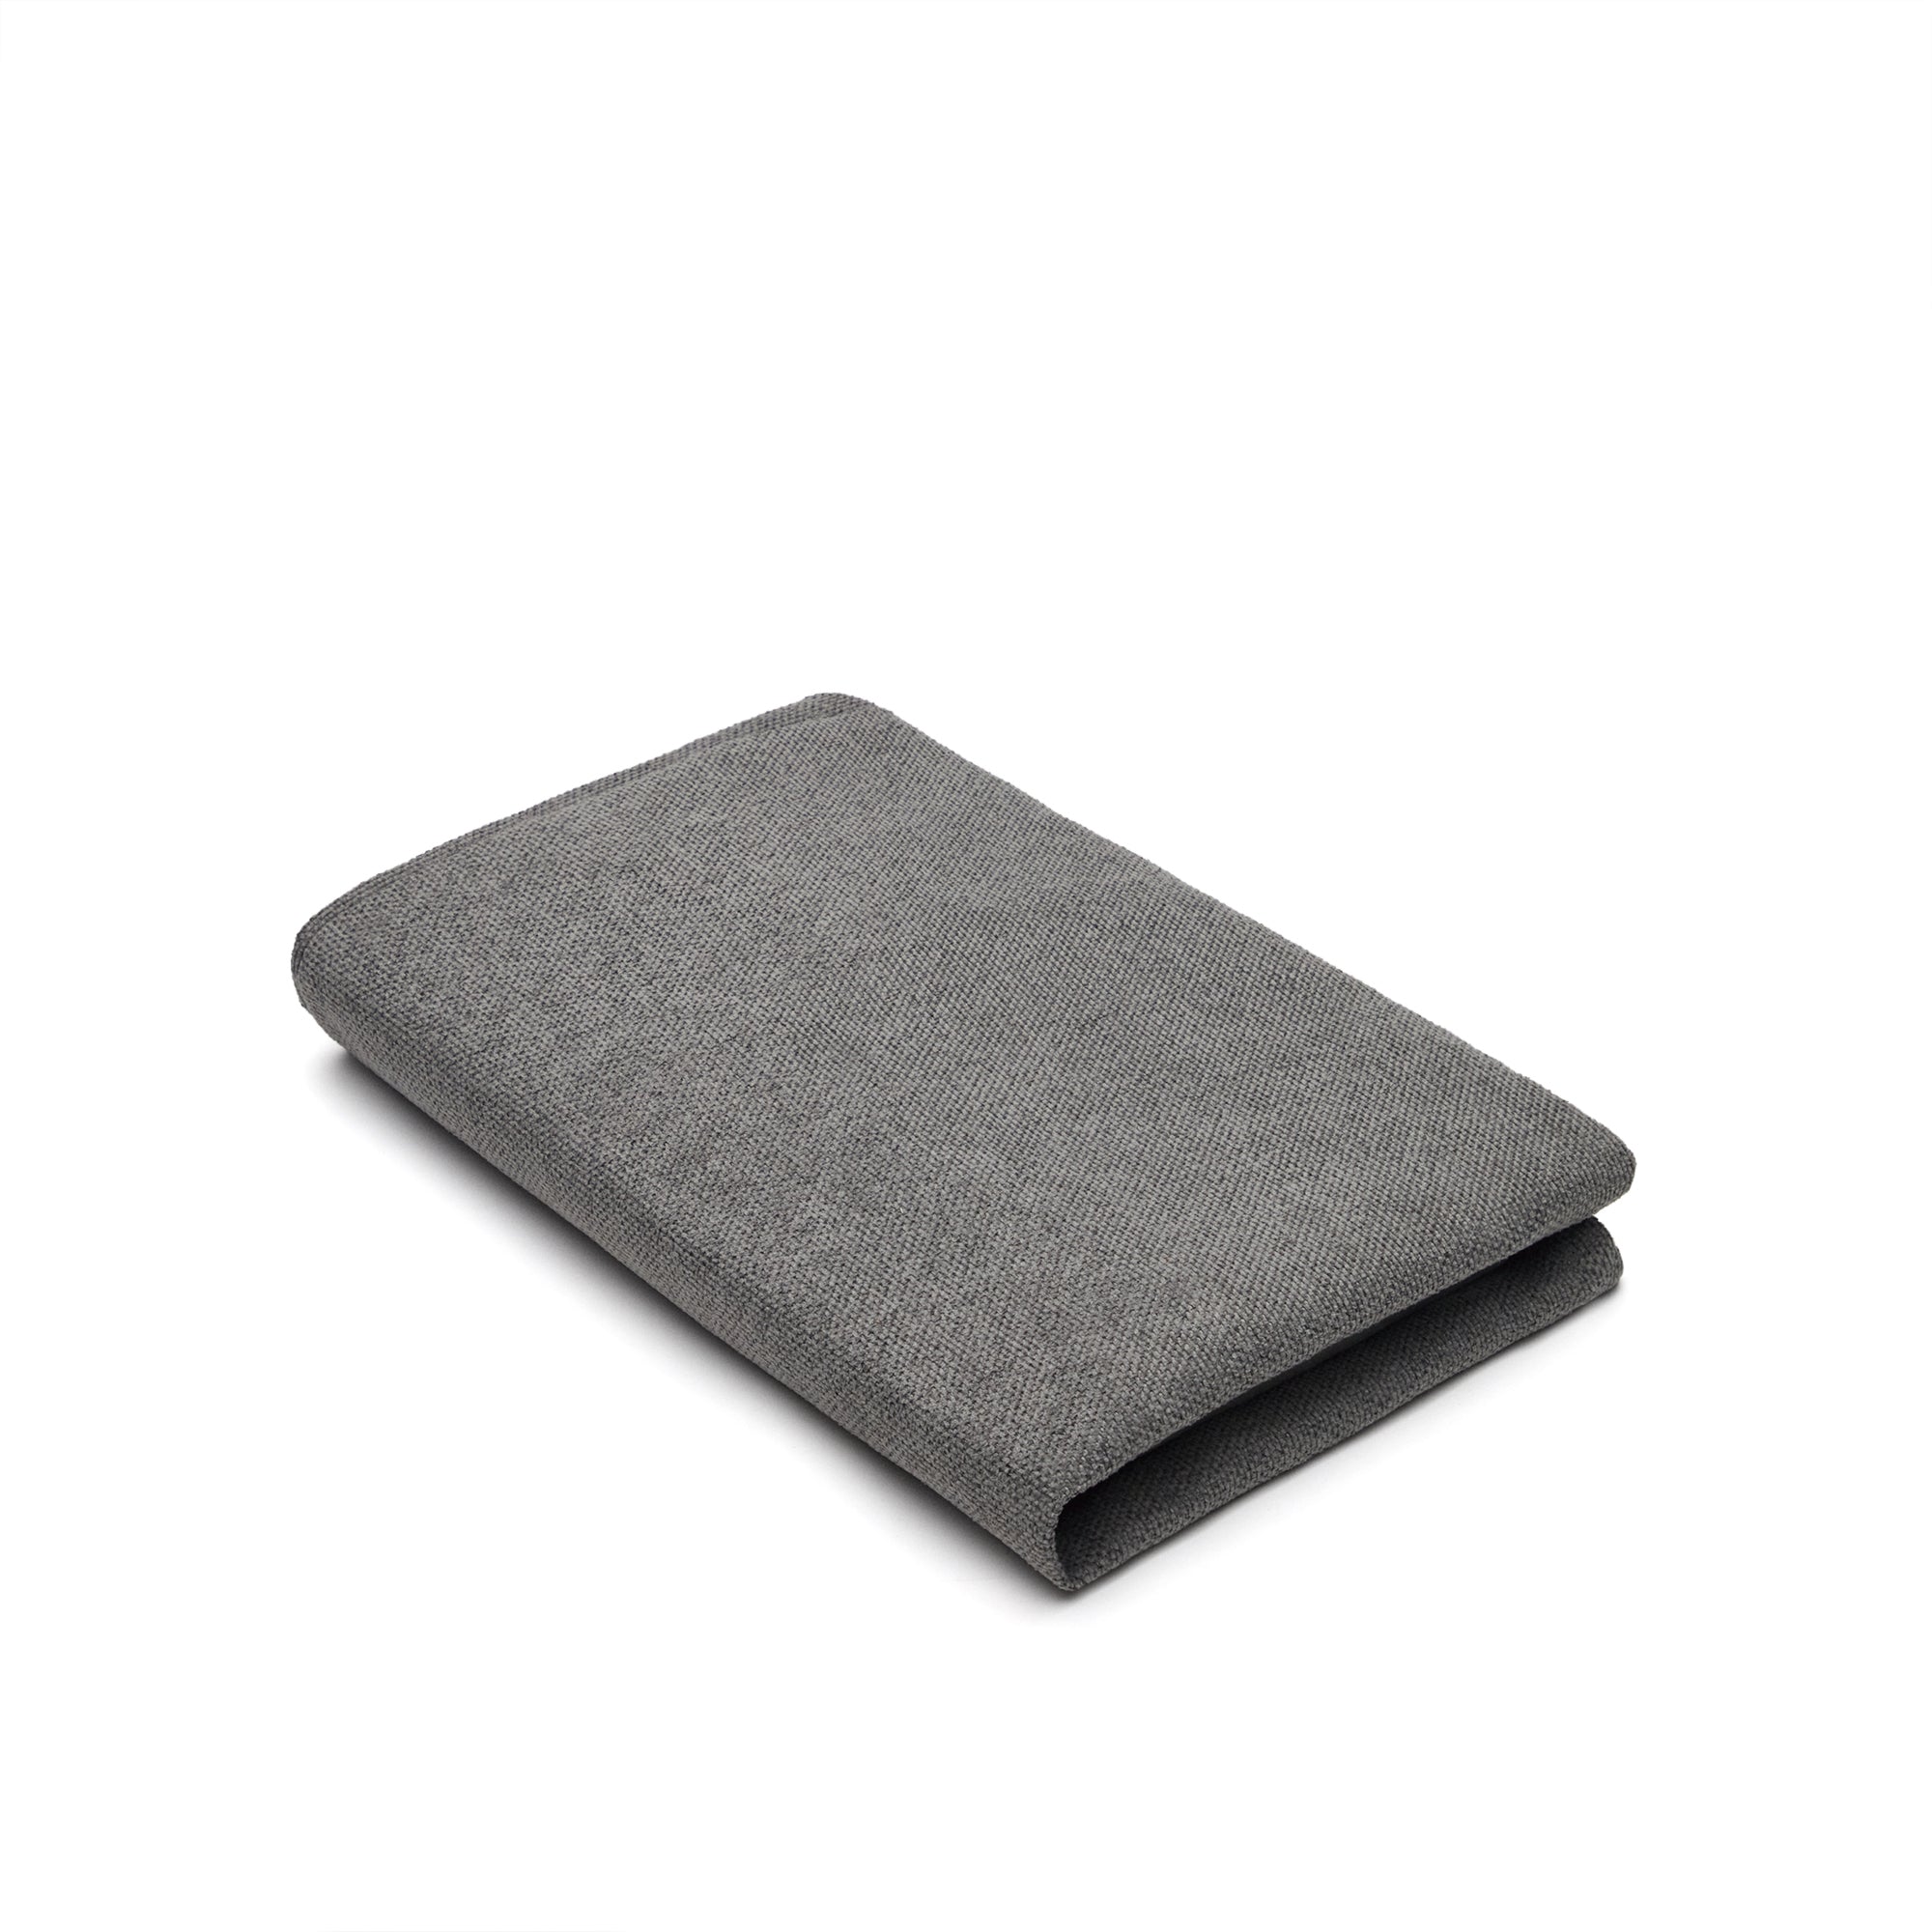 Bowie cover for small bed for pets in dark grey, 63 x 80 cm